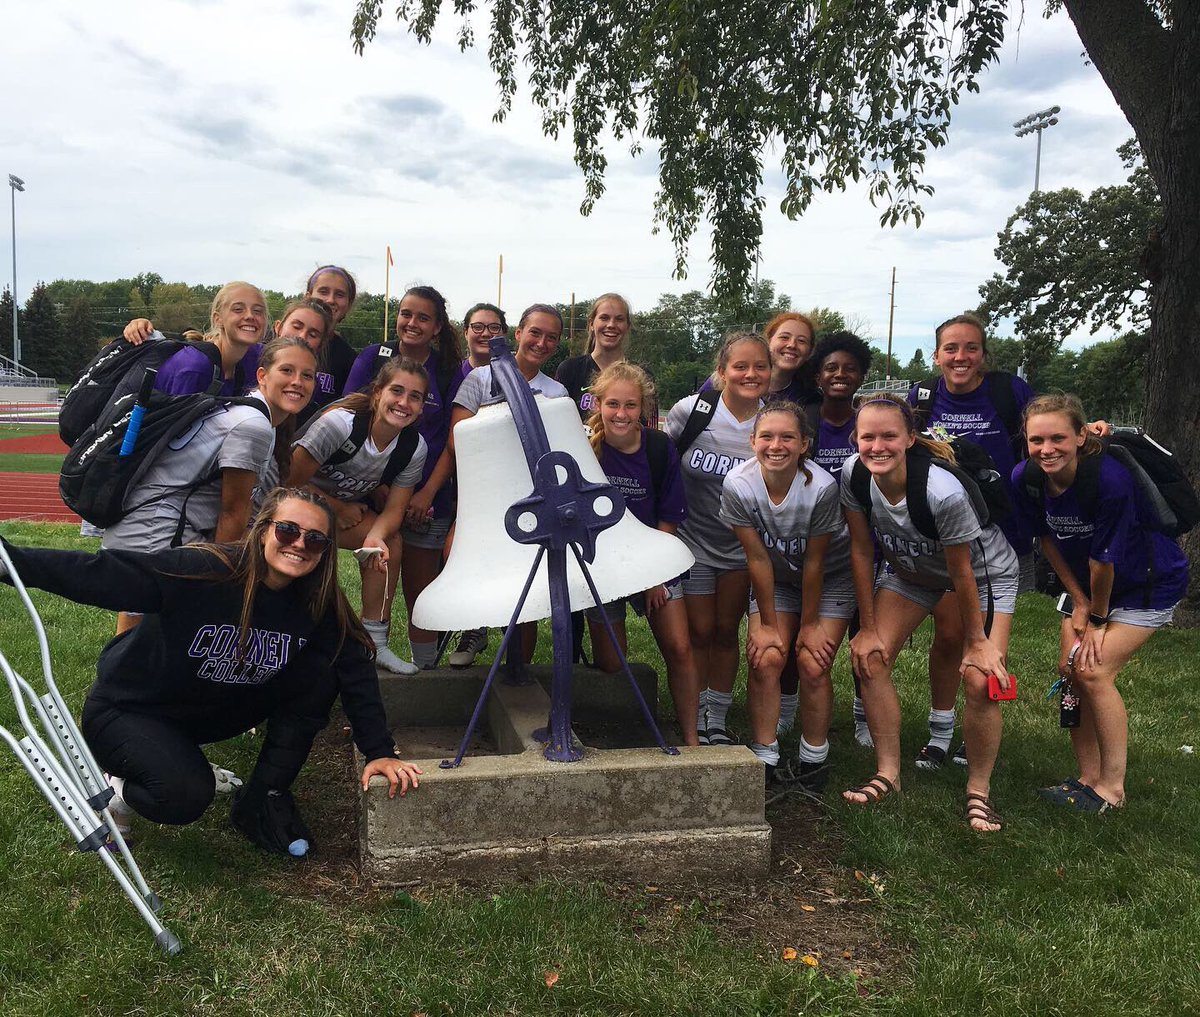 Women’s soccer rang the bell today after their big win against MacMurray at home! Congrats ladies &amp; #GoRams !! 